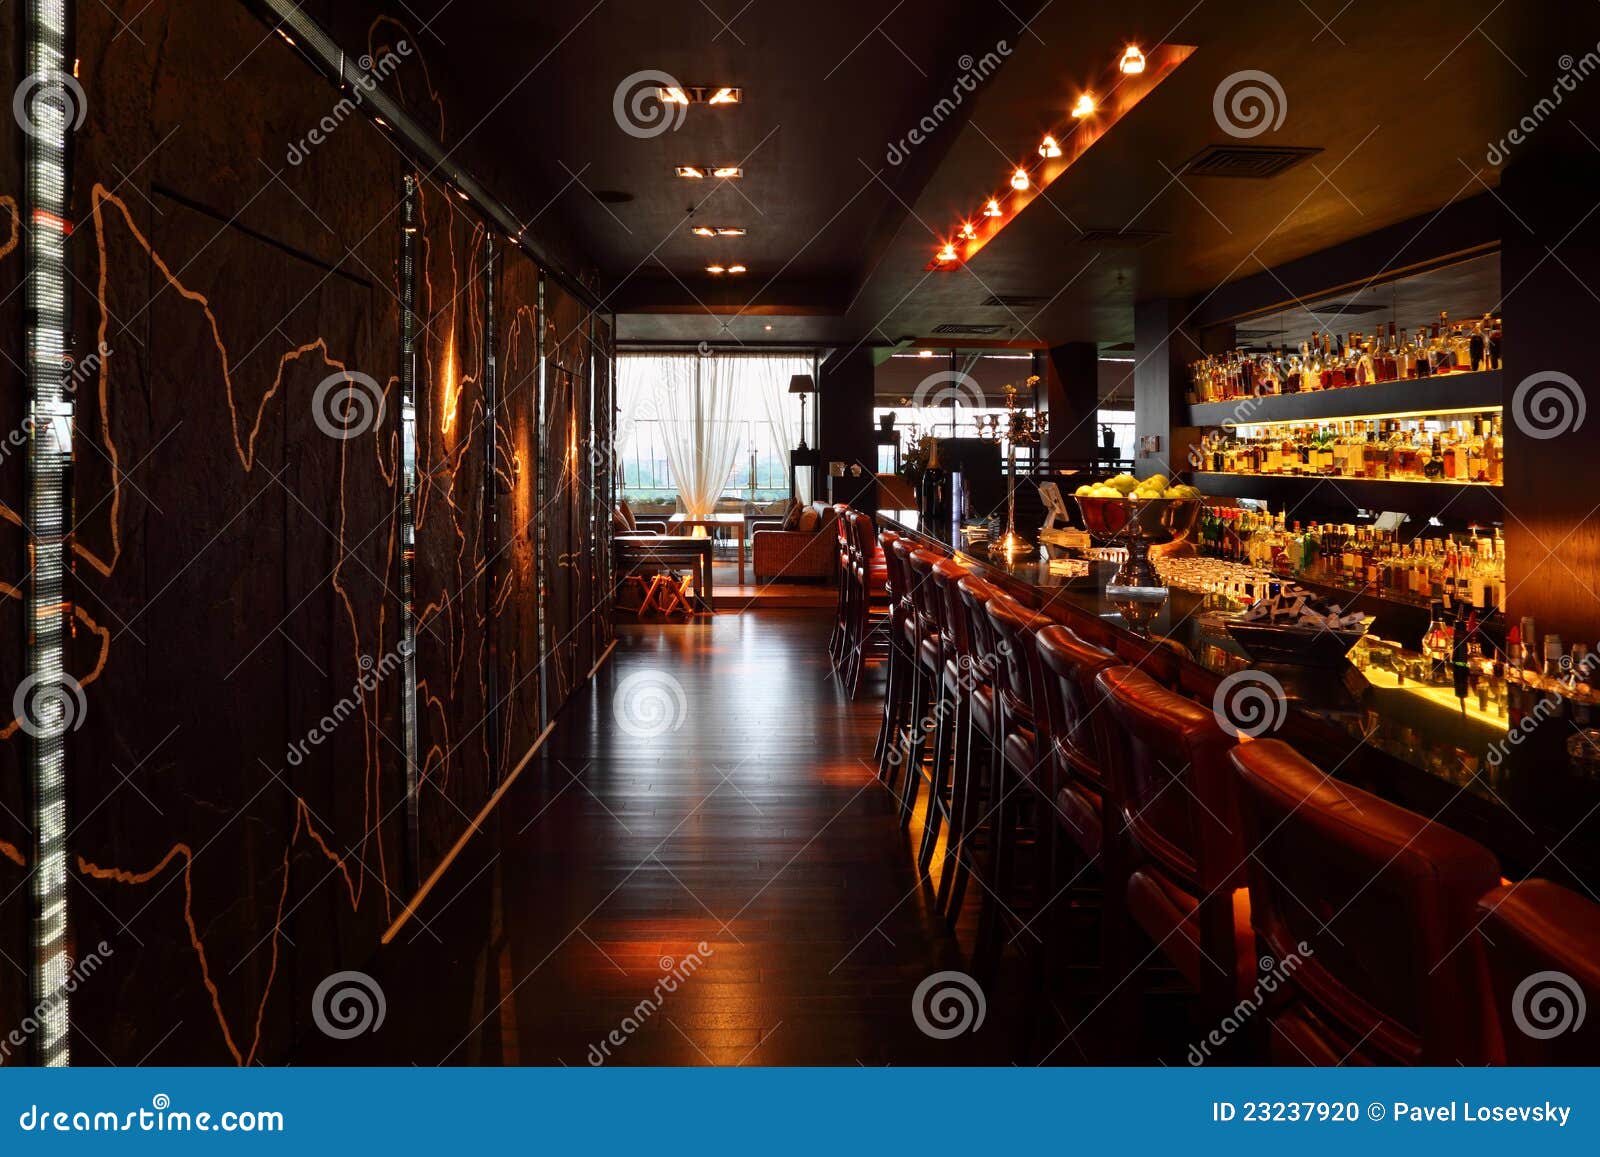 bar counter with tall chairs in empty restaurant